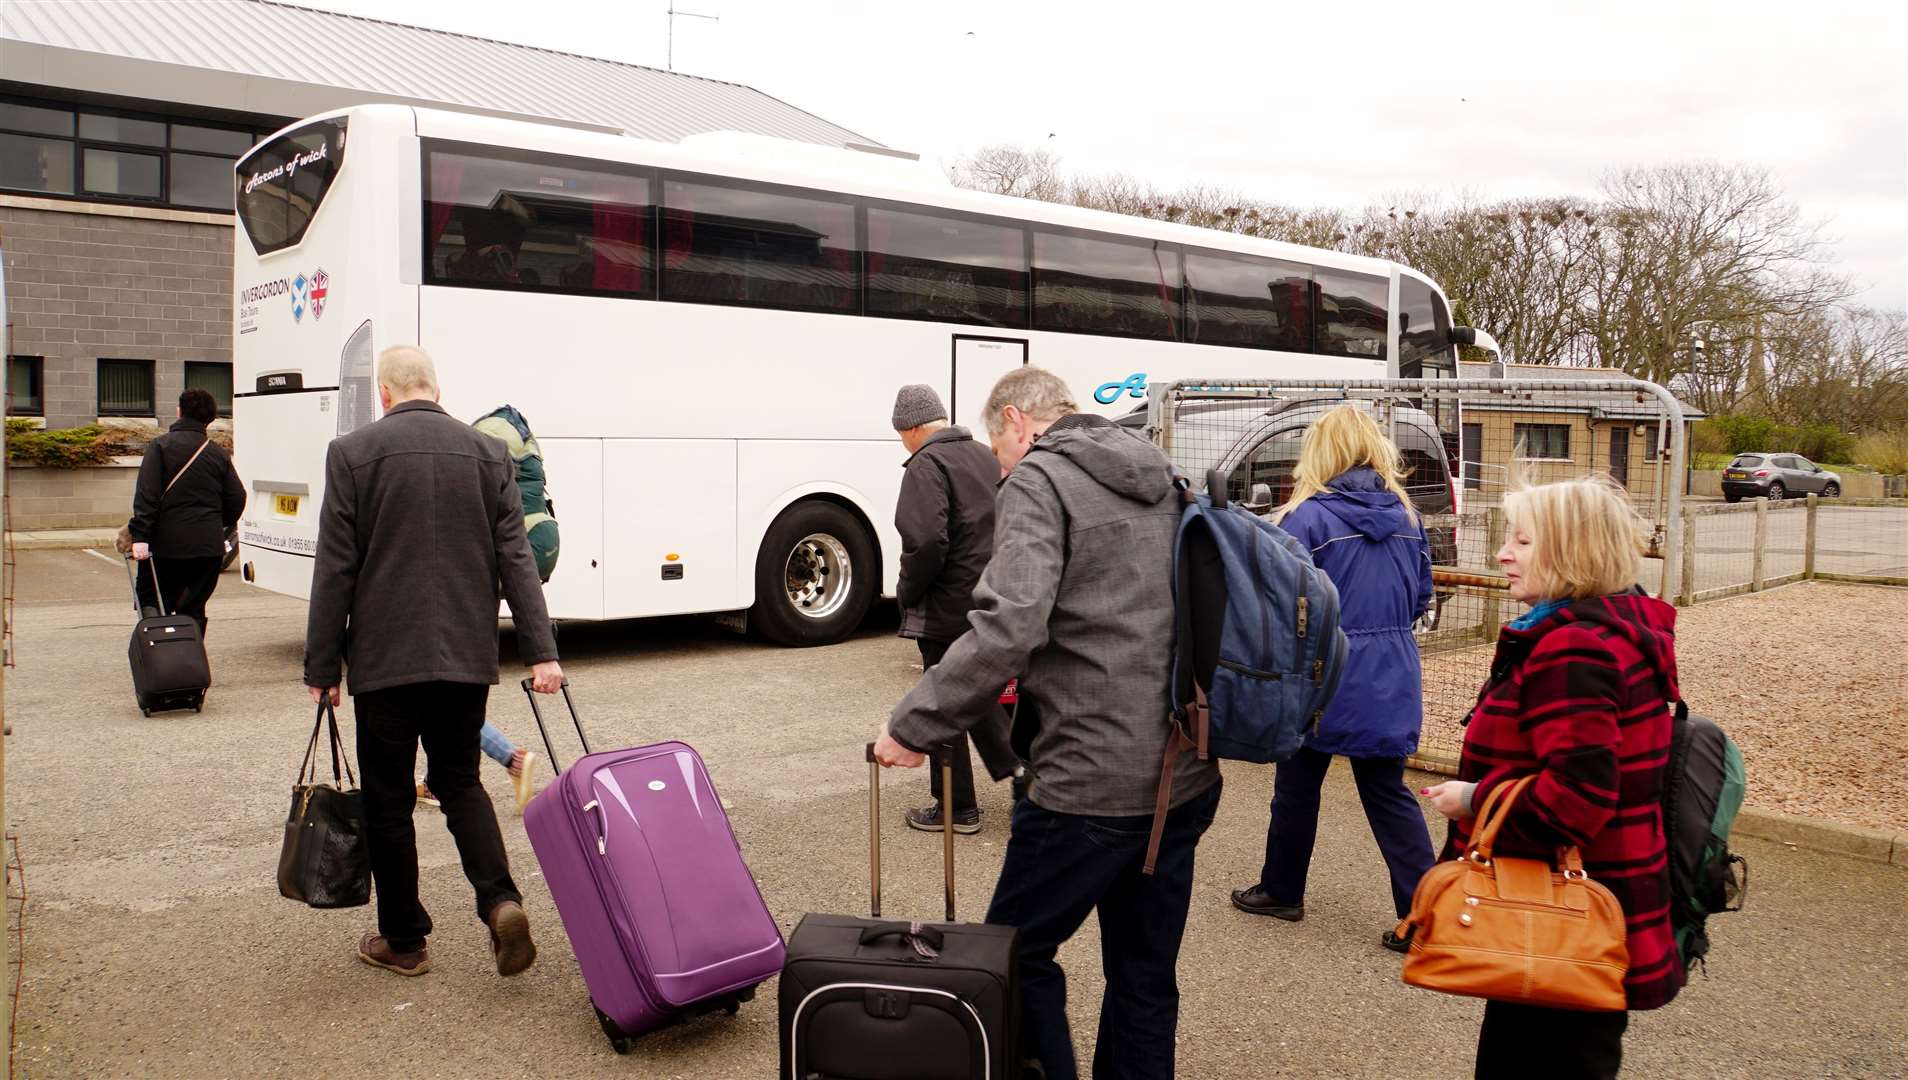 The passengers are allocated a bus to take them on their journey south from Wick.